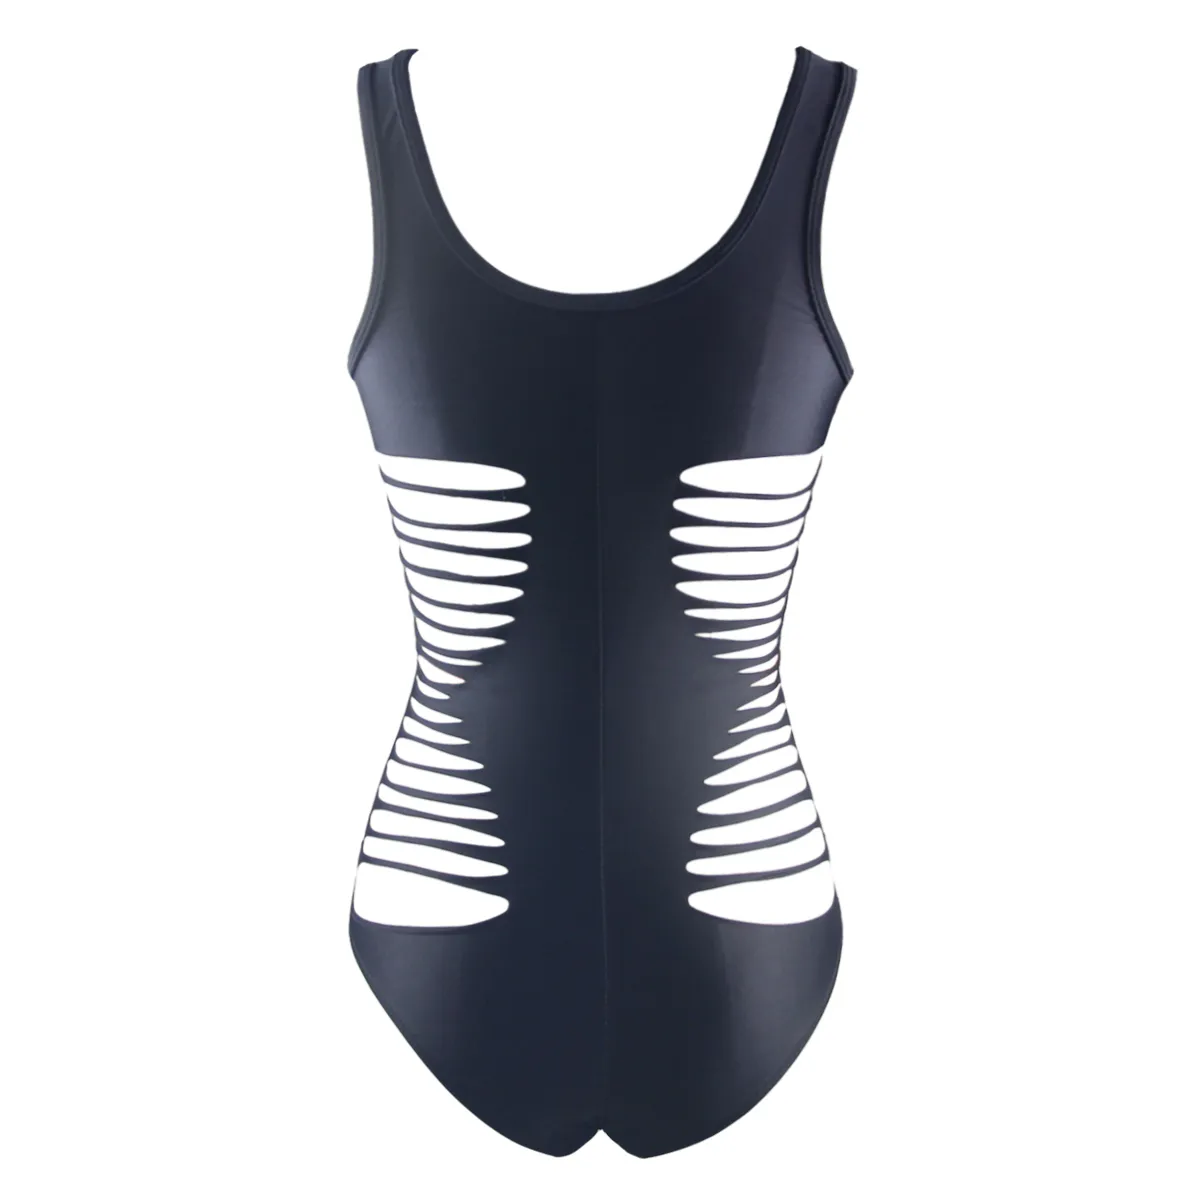 Hottest Women's Fashion Sexy Hollow Out Monokini One Piece Swimsuit